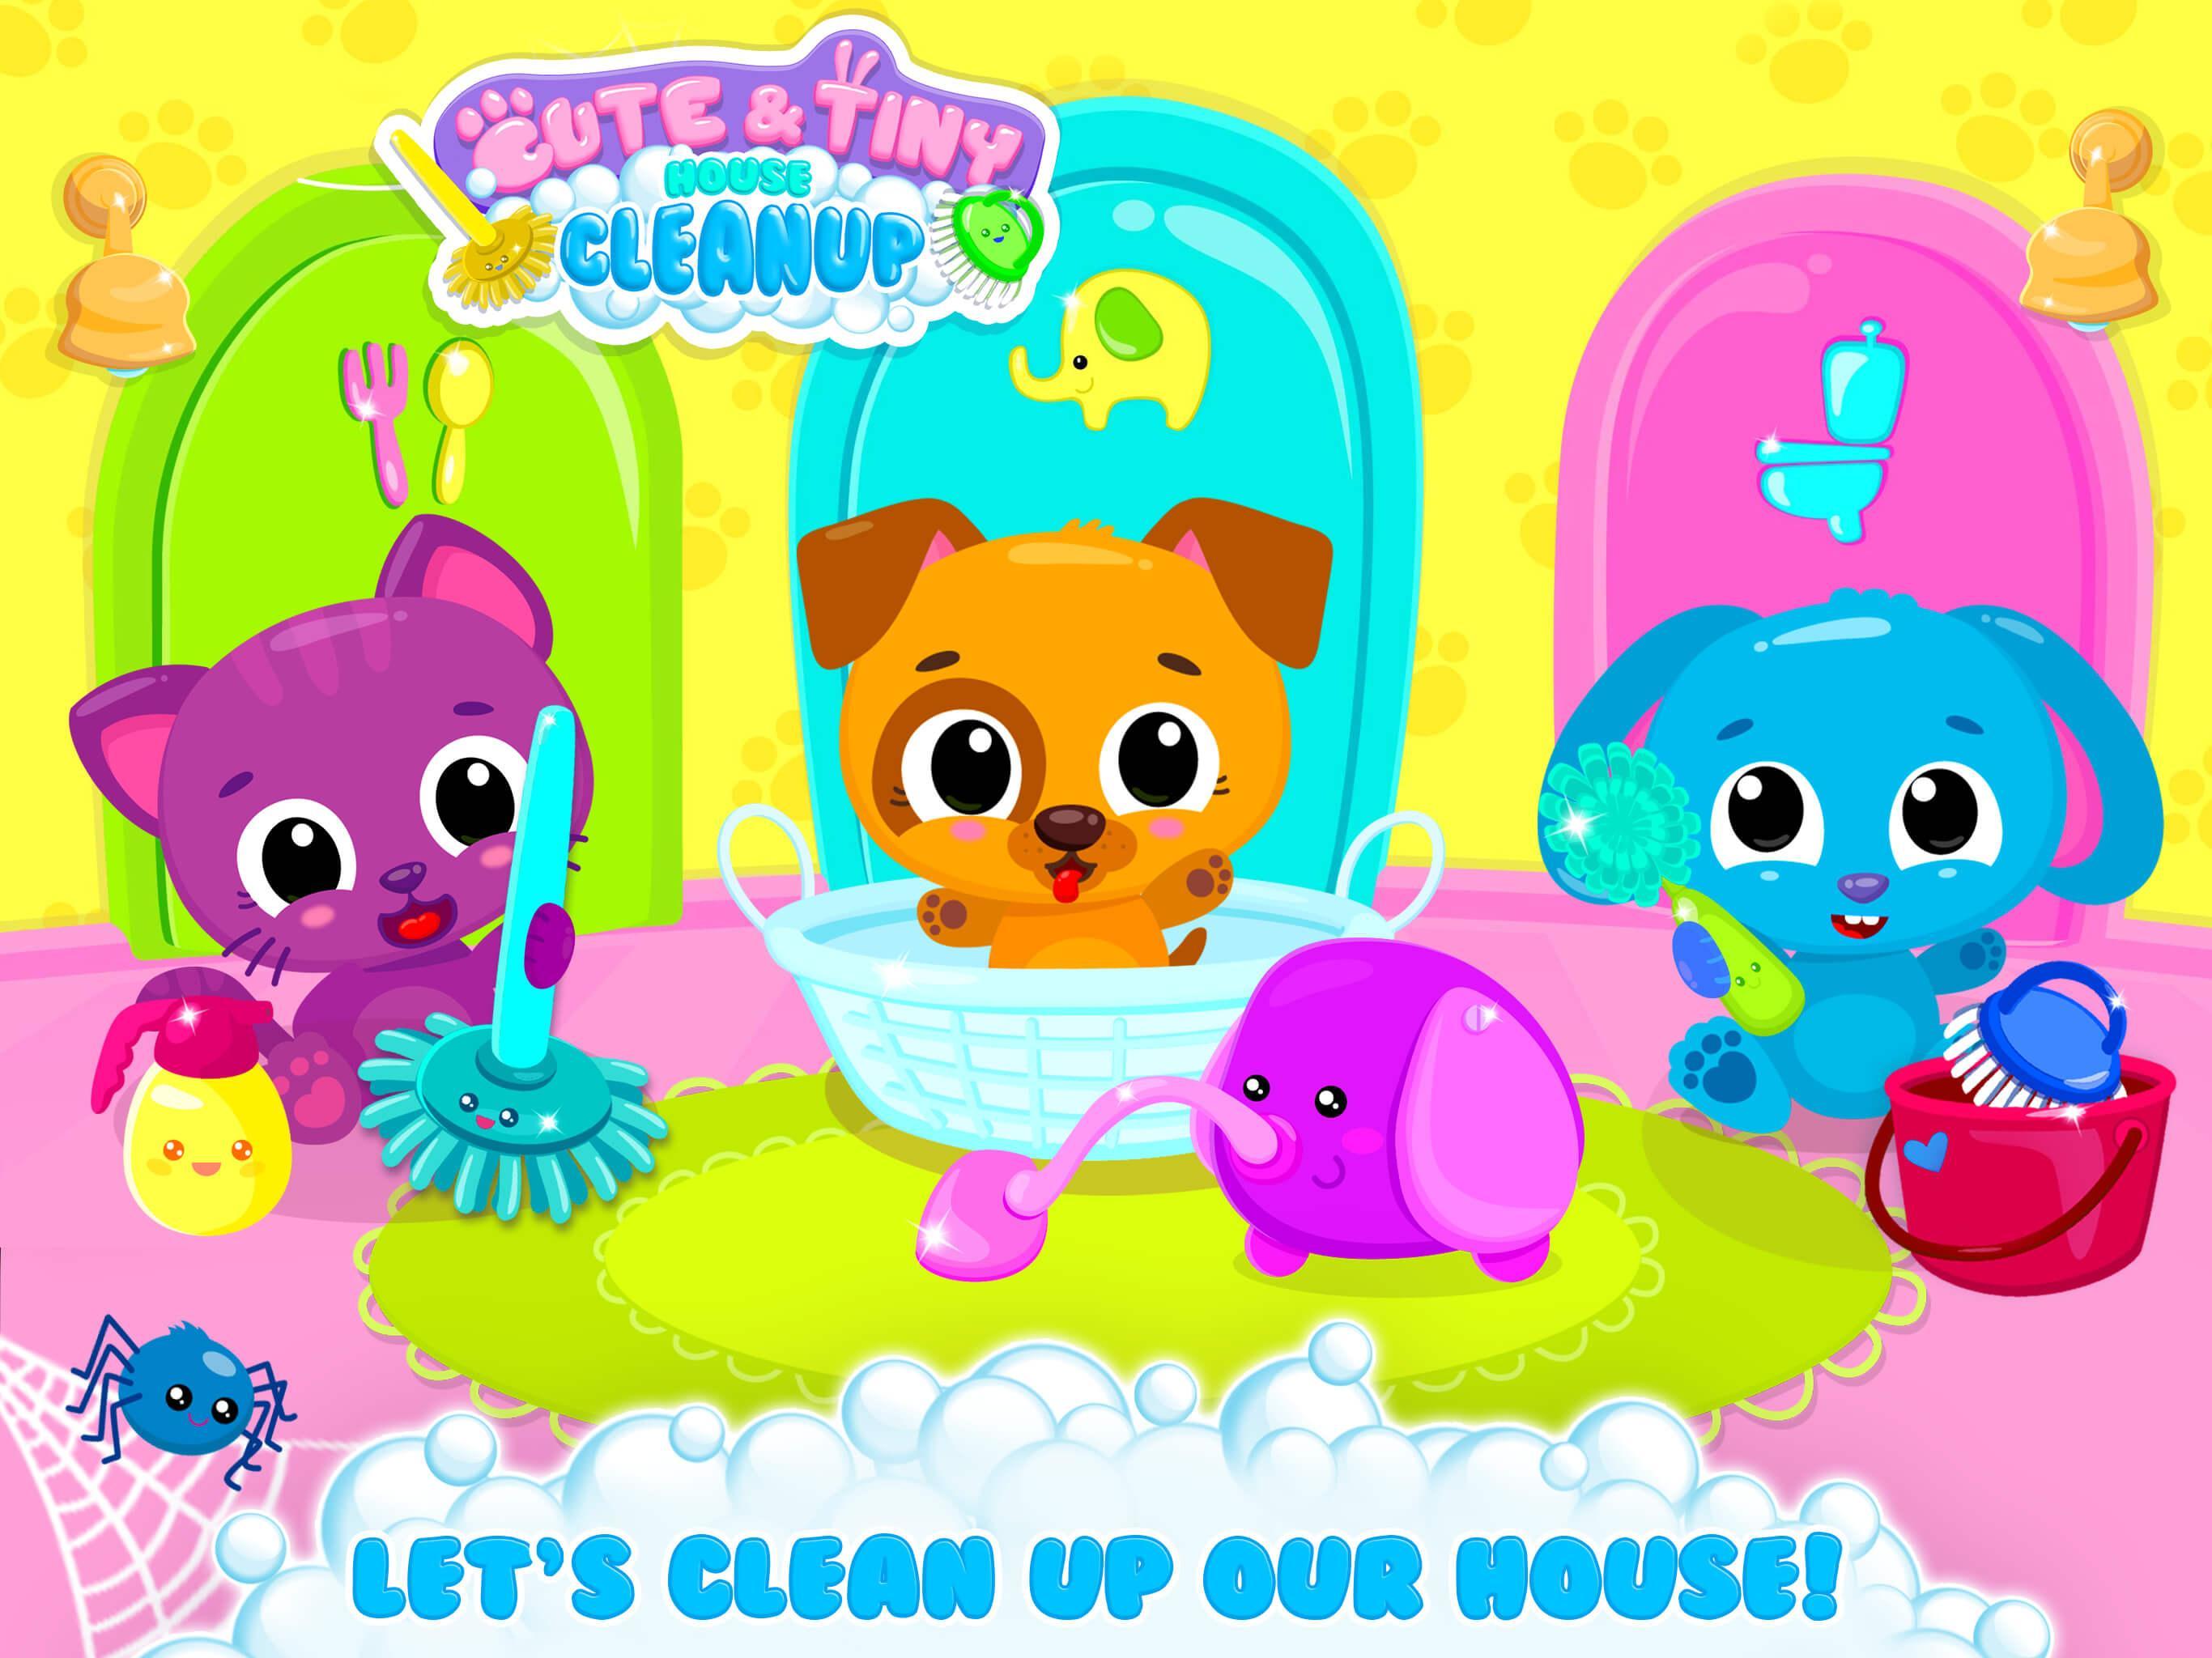 Cute & Tiny House Cleanup - Learn Daily Choresのキャプチャ